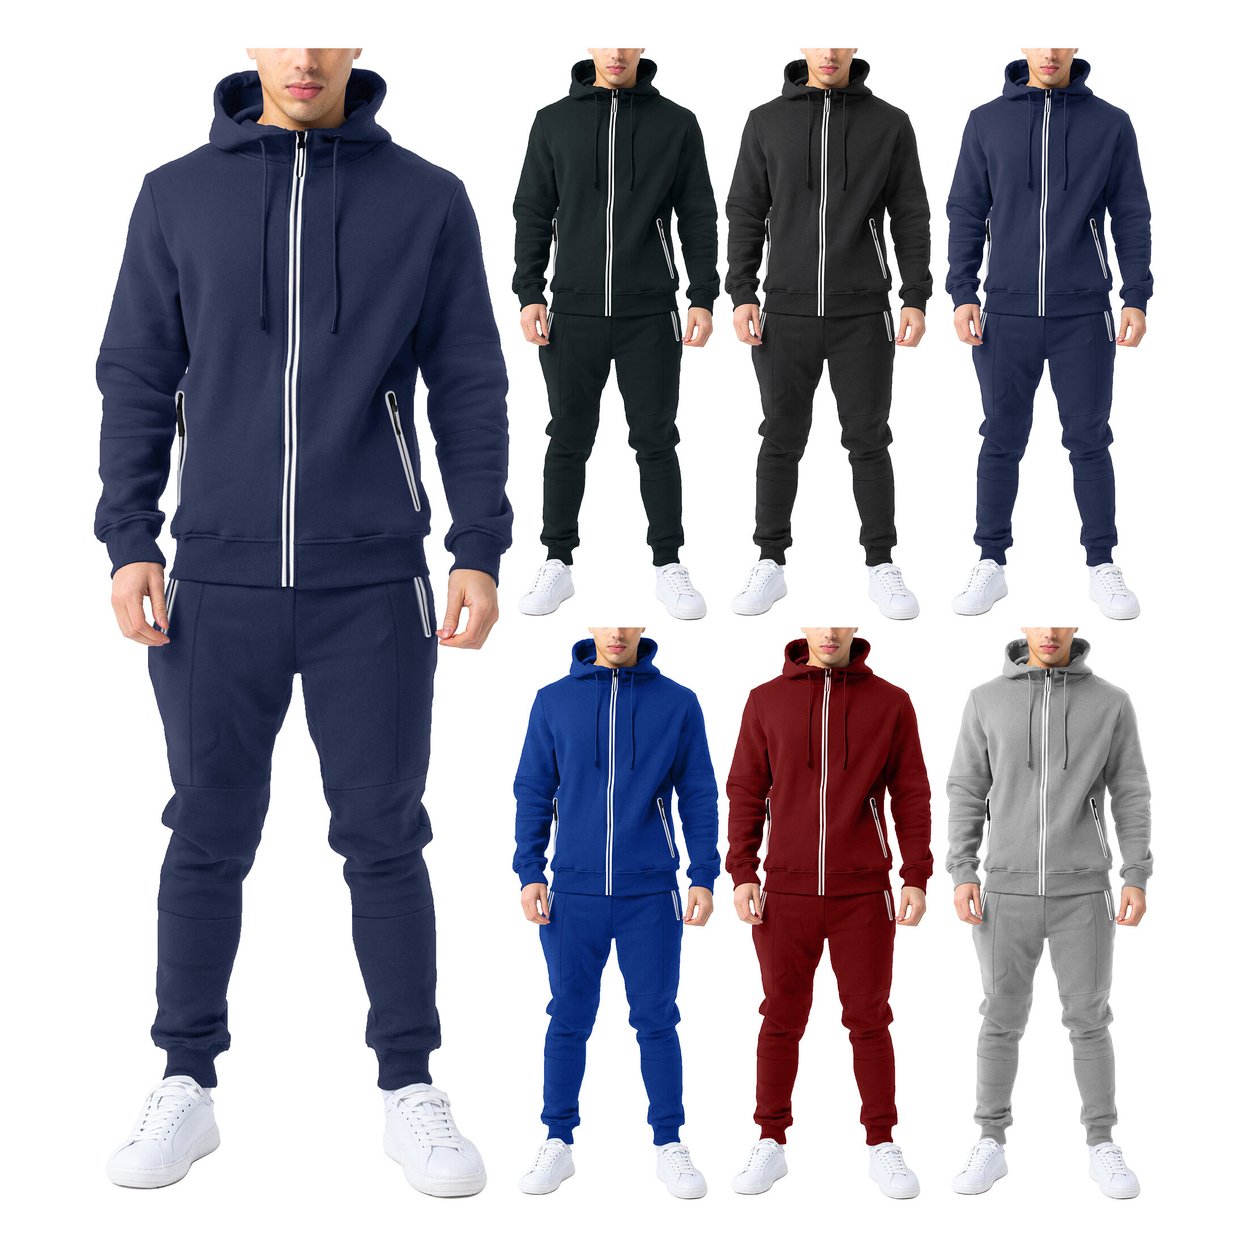 2-Pack: Men's Cozy Slim Fit Active Athletic Full Zip Hoodie And Jogger Tracksuit - Red & Blue, Medium